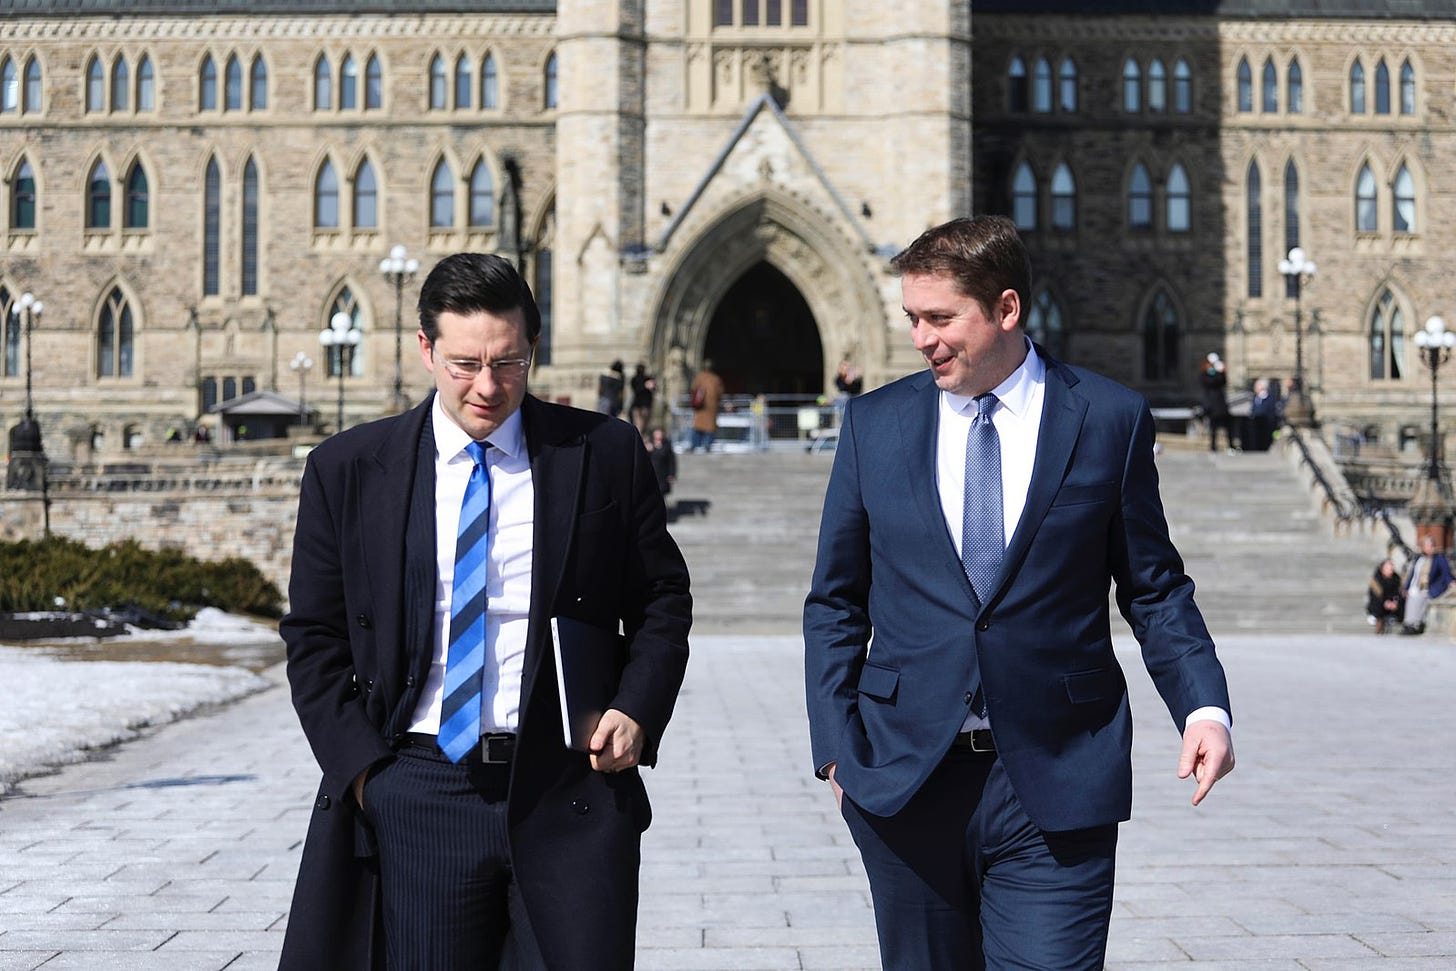 Pierre Poilievre walks with Andrew Scheer outside the Parliament buildings in Ottawa.